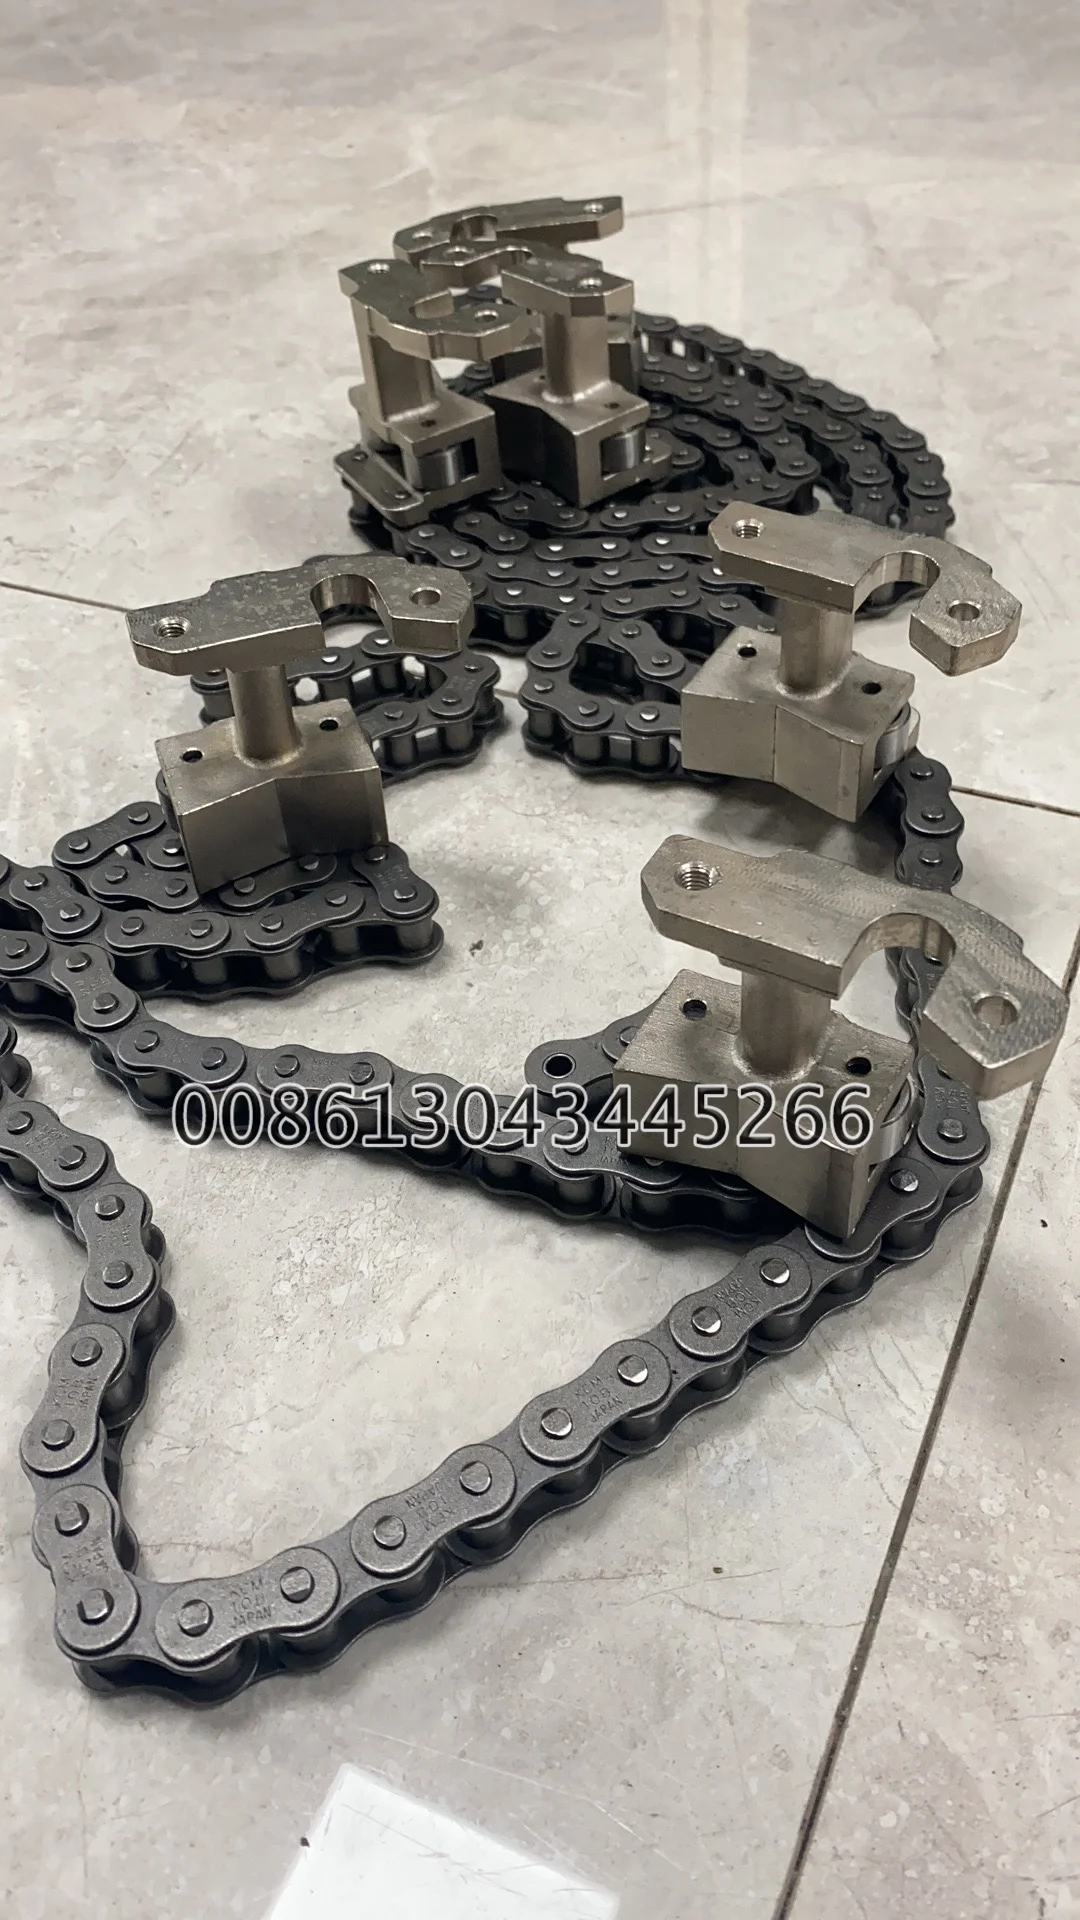 

1 Set = 2 Piece Best Quality MV.029.487/06 SM52 Delivery Chain OS G2.014.007S DS G2.014.006S offset printing machine Spare Parts